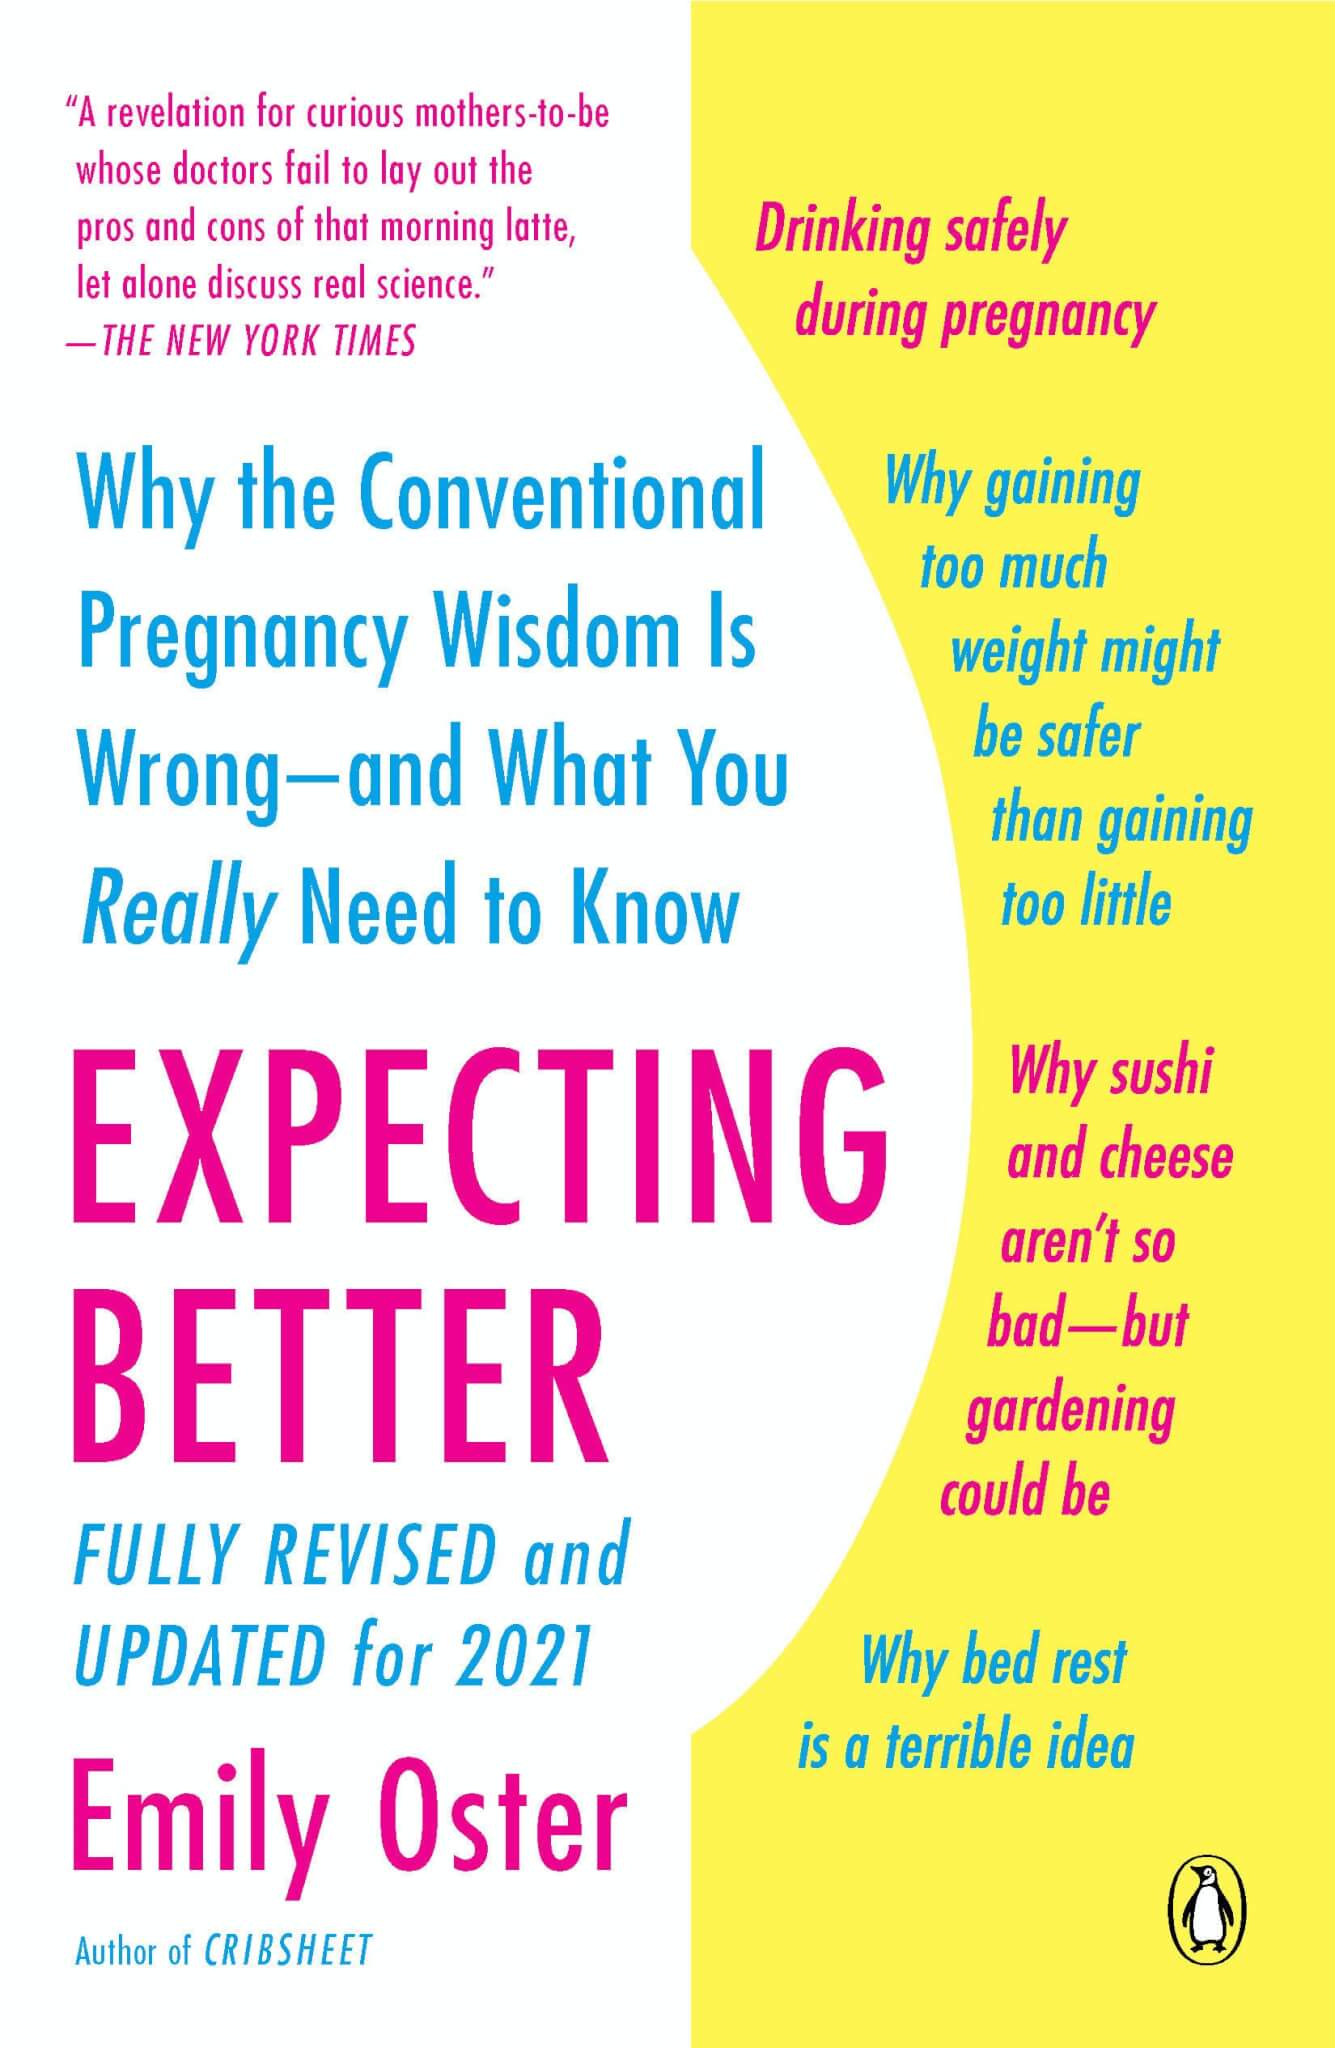 “Expecting Better: Why the Conventional Pregnancy Wisdom Is Wrong—and What You Really Need to Know” by Emily Oster